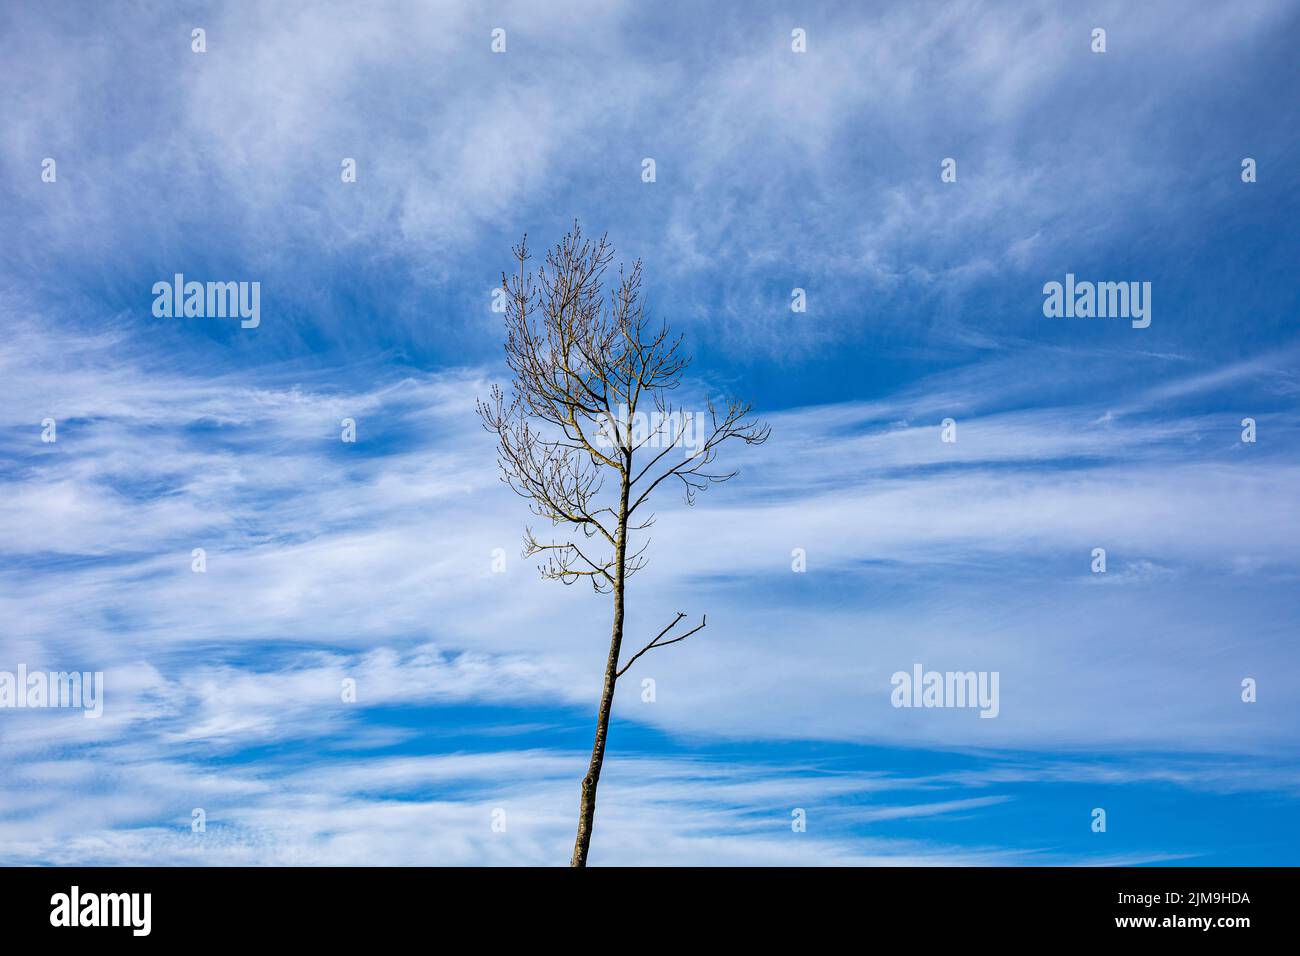 Lonely tree isolated against blue sky with white fluffy clouds Stock Photo